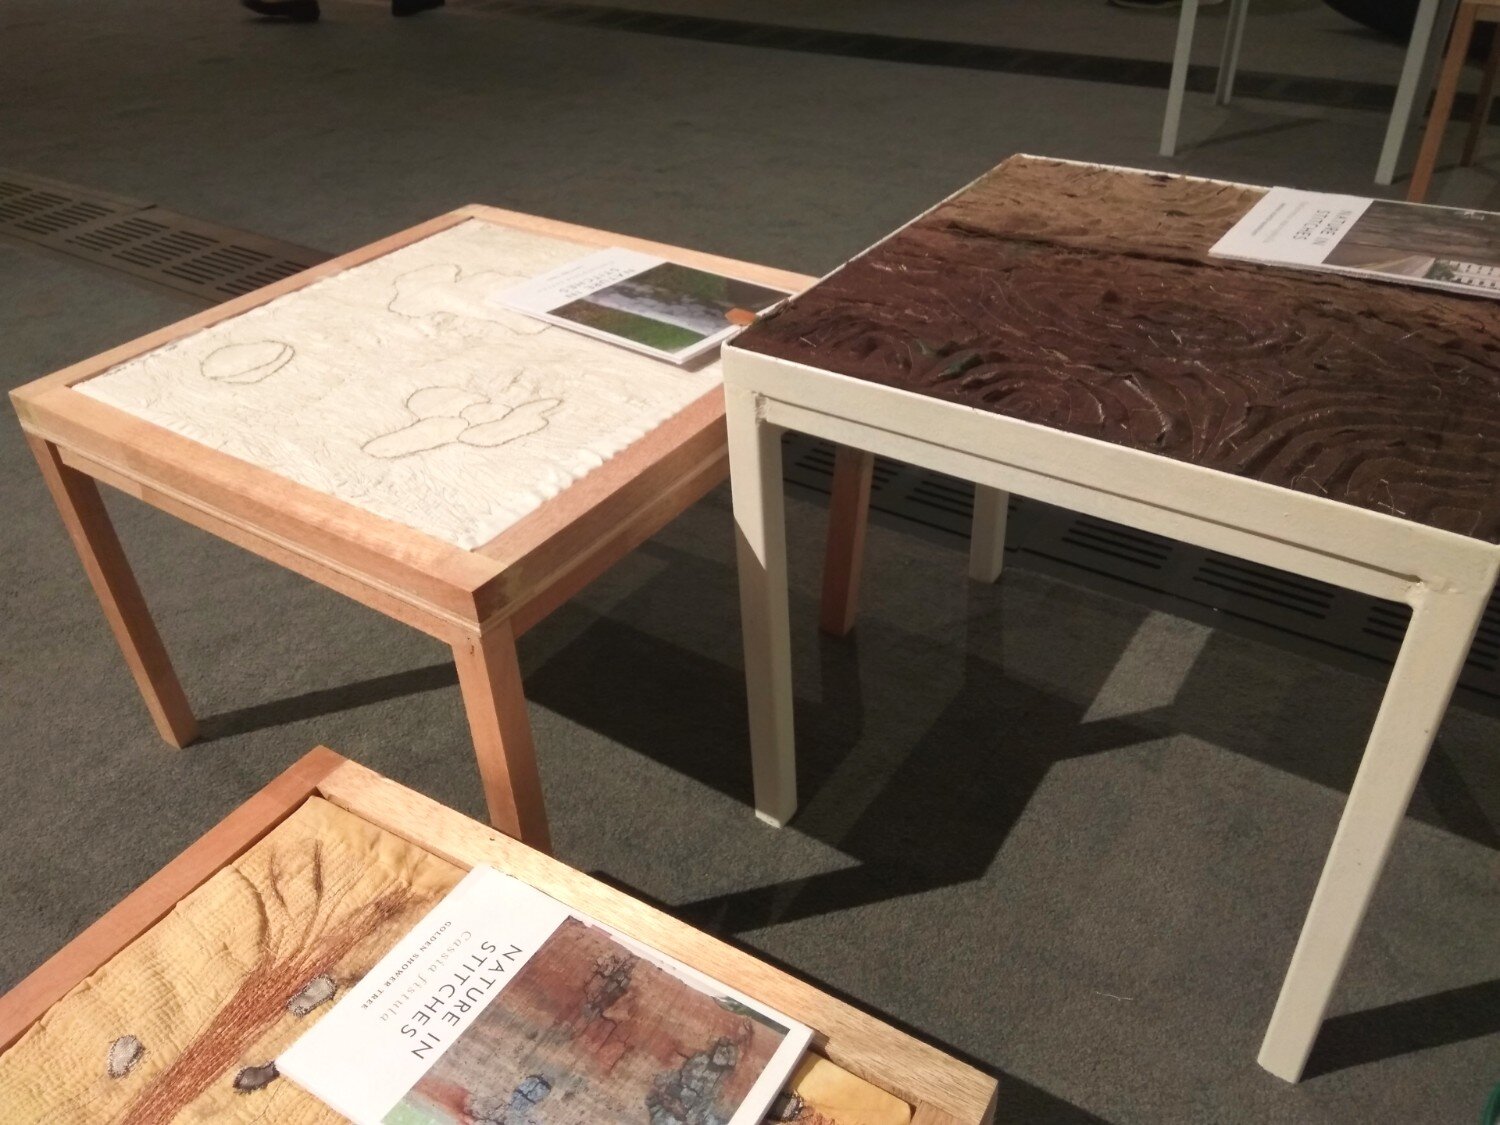 Textile art installation comprising interpretations of tree bark embroidered on coffee tables.